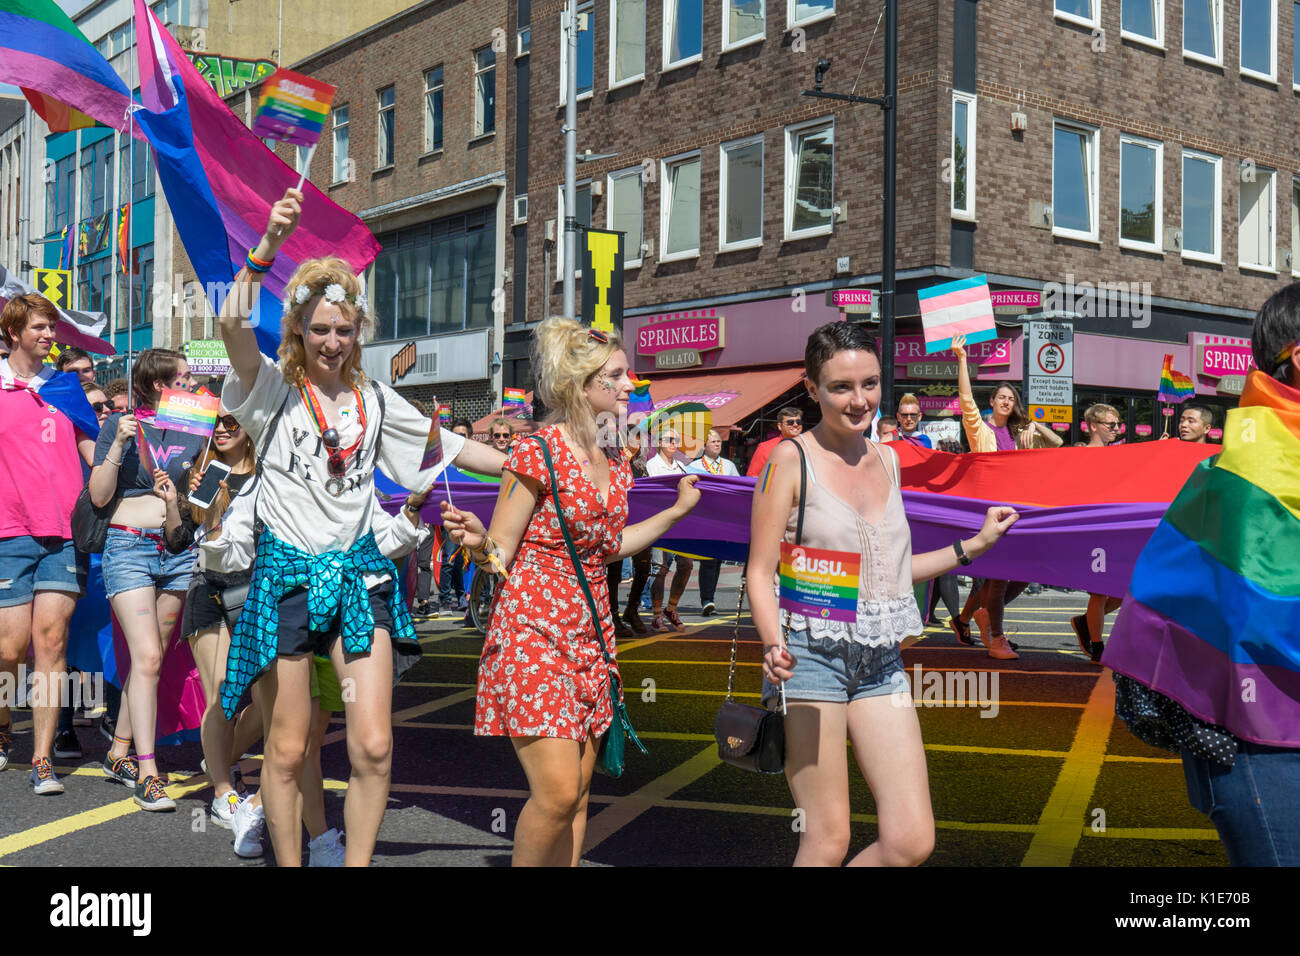 Southampton, UK. 26th of August 2017. People marching through the streets of Southampton to participate in a very colourful and vibrant parade at the Annual Southampton Pride Festival 2017. This is the second year of the festival taking place. Stock Photo